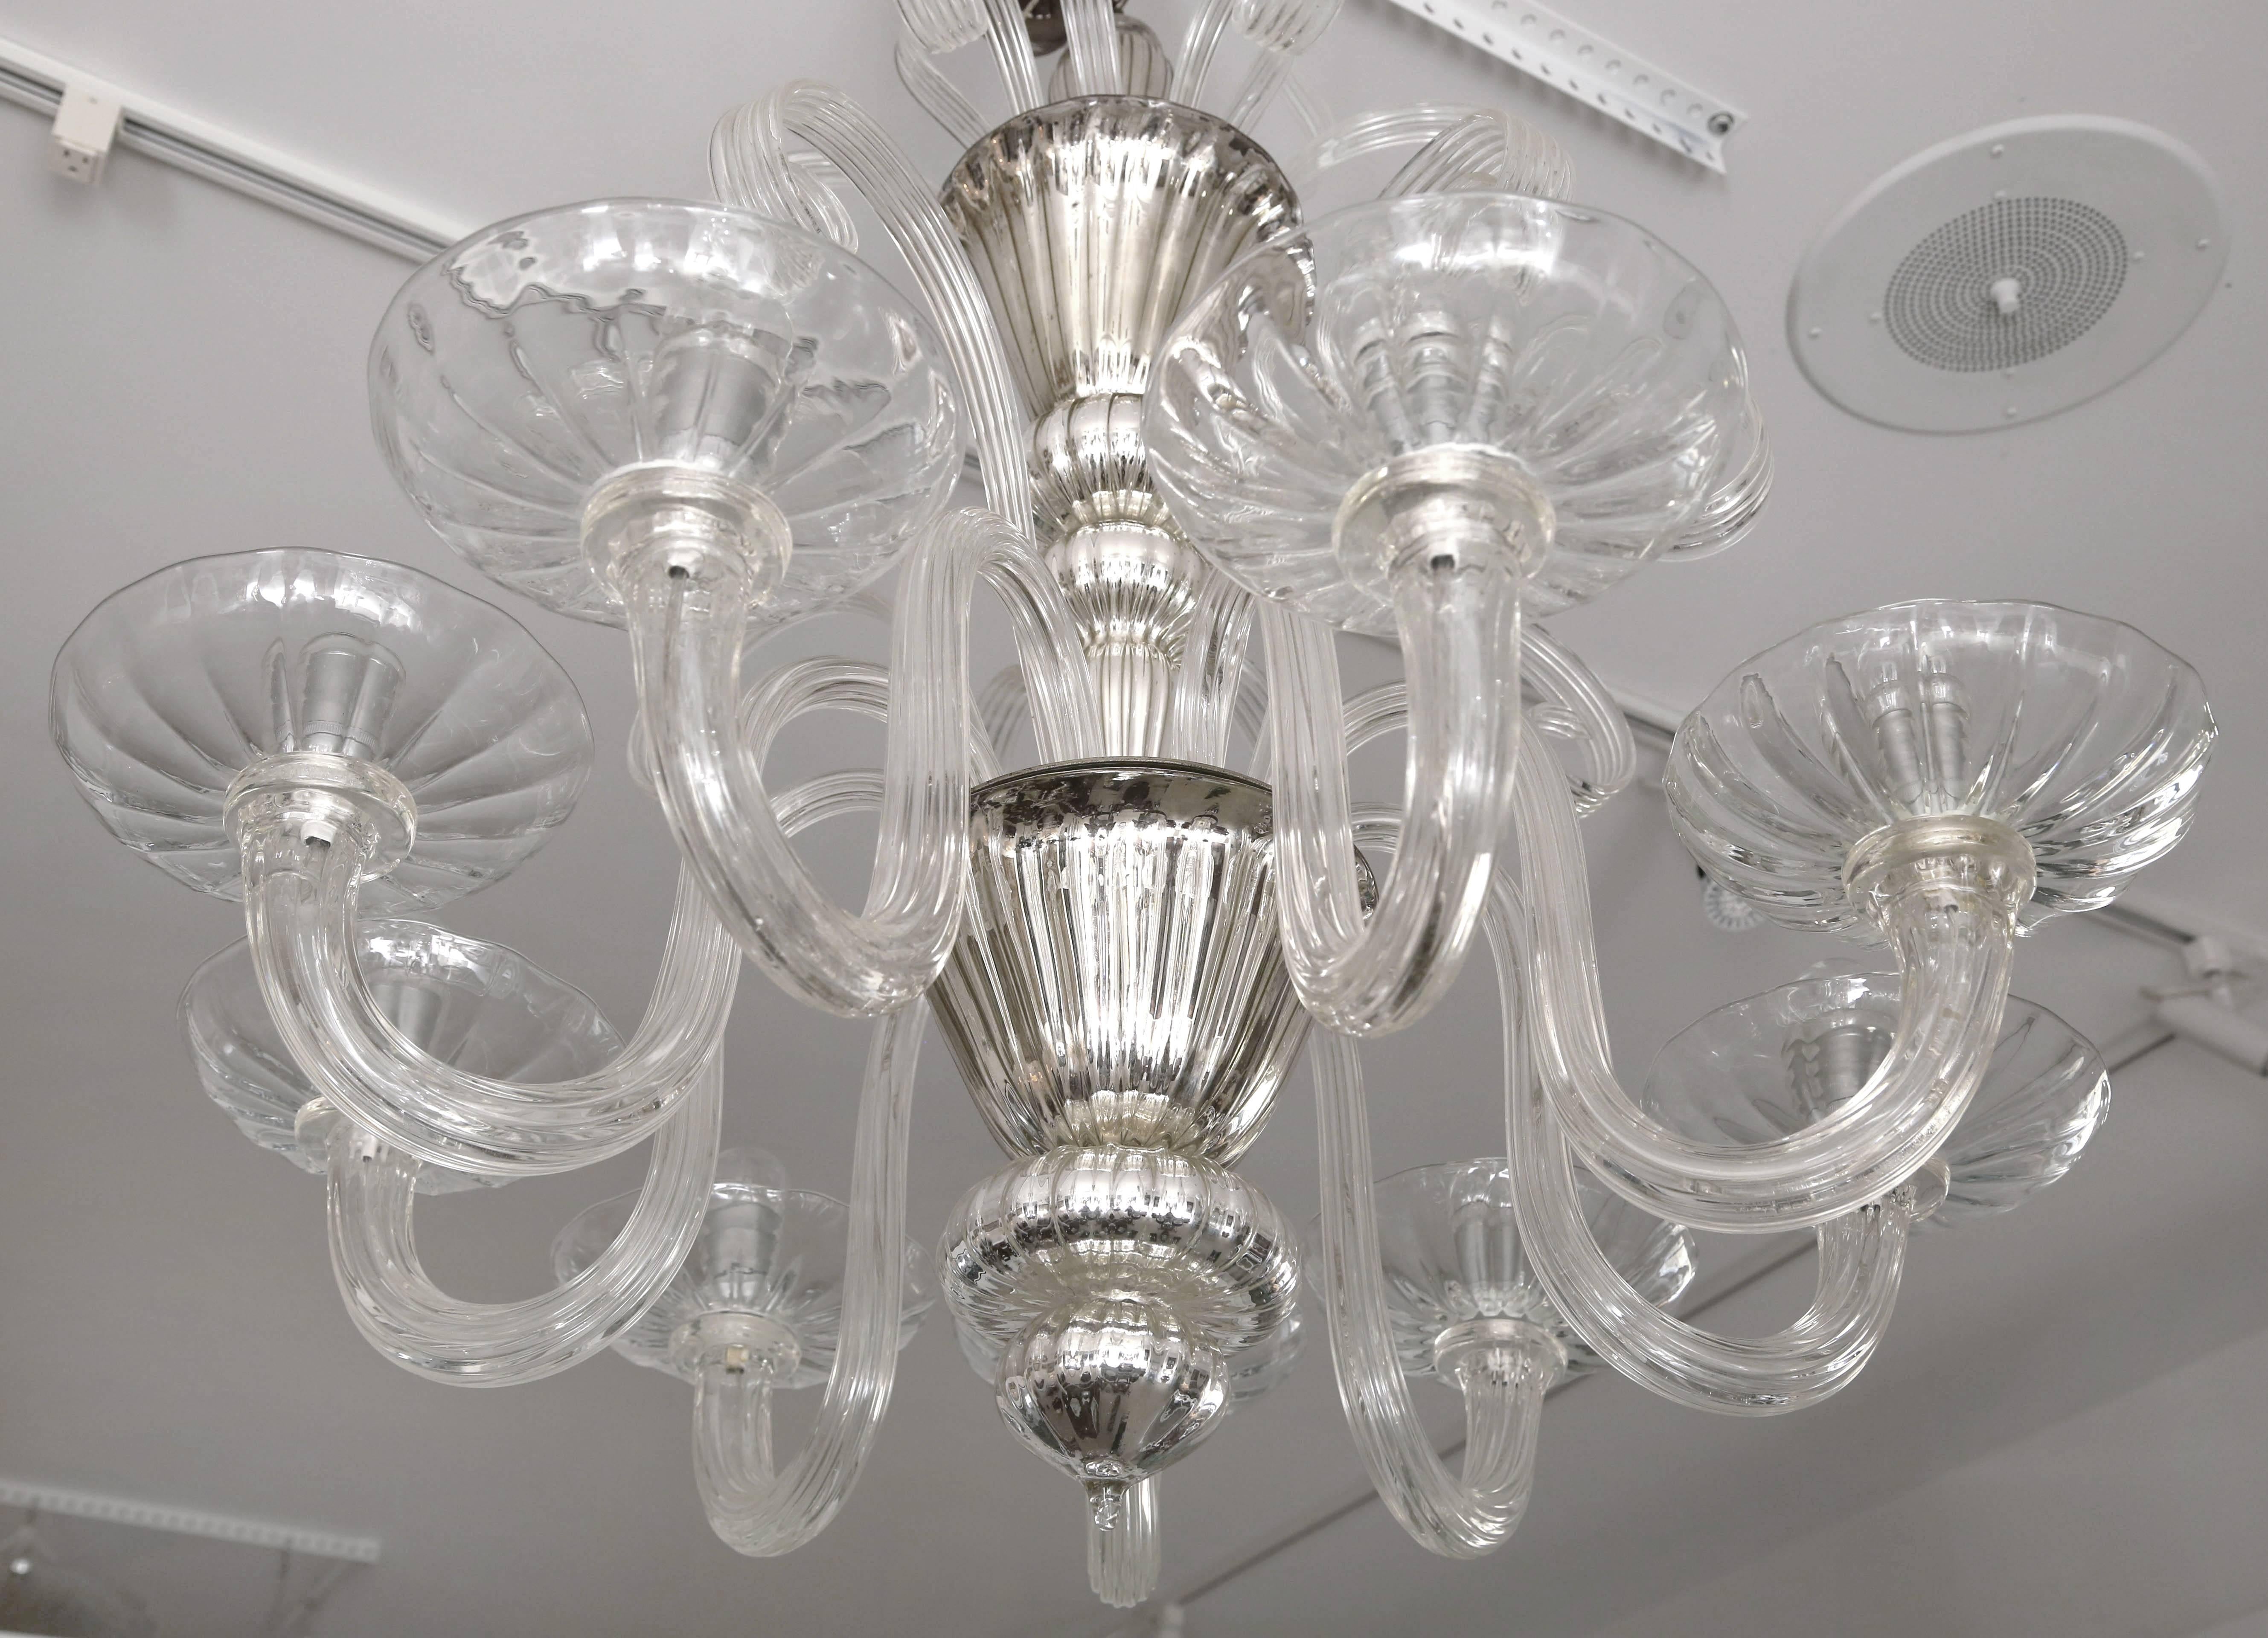 This stylish, large-scale, nine-light Venetian glass chandelier dates from the late 1930s to the early 1940s and is fabricated in clear and mercury or silver glass. 

Note: There is one of the smaller plume or feathers missing see image #7 showing